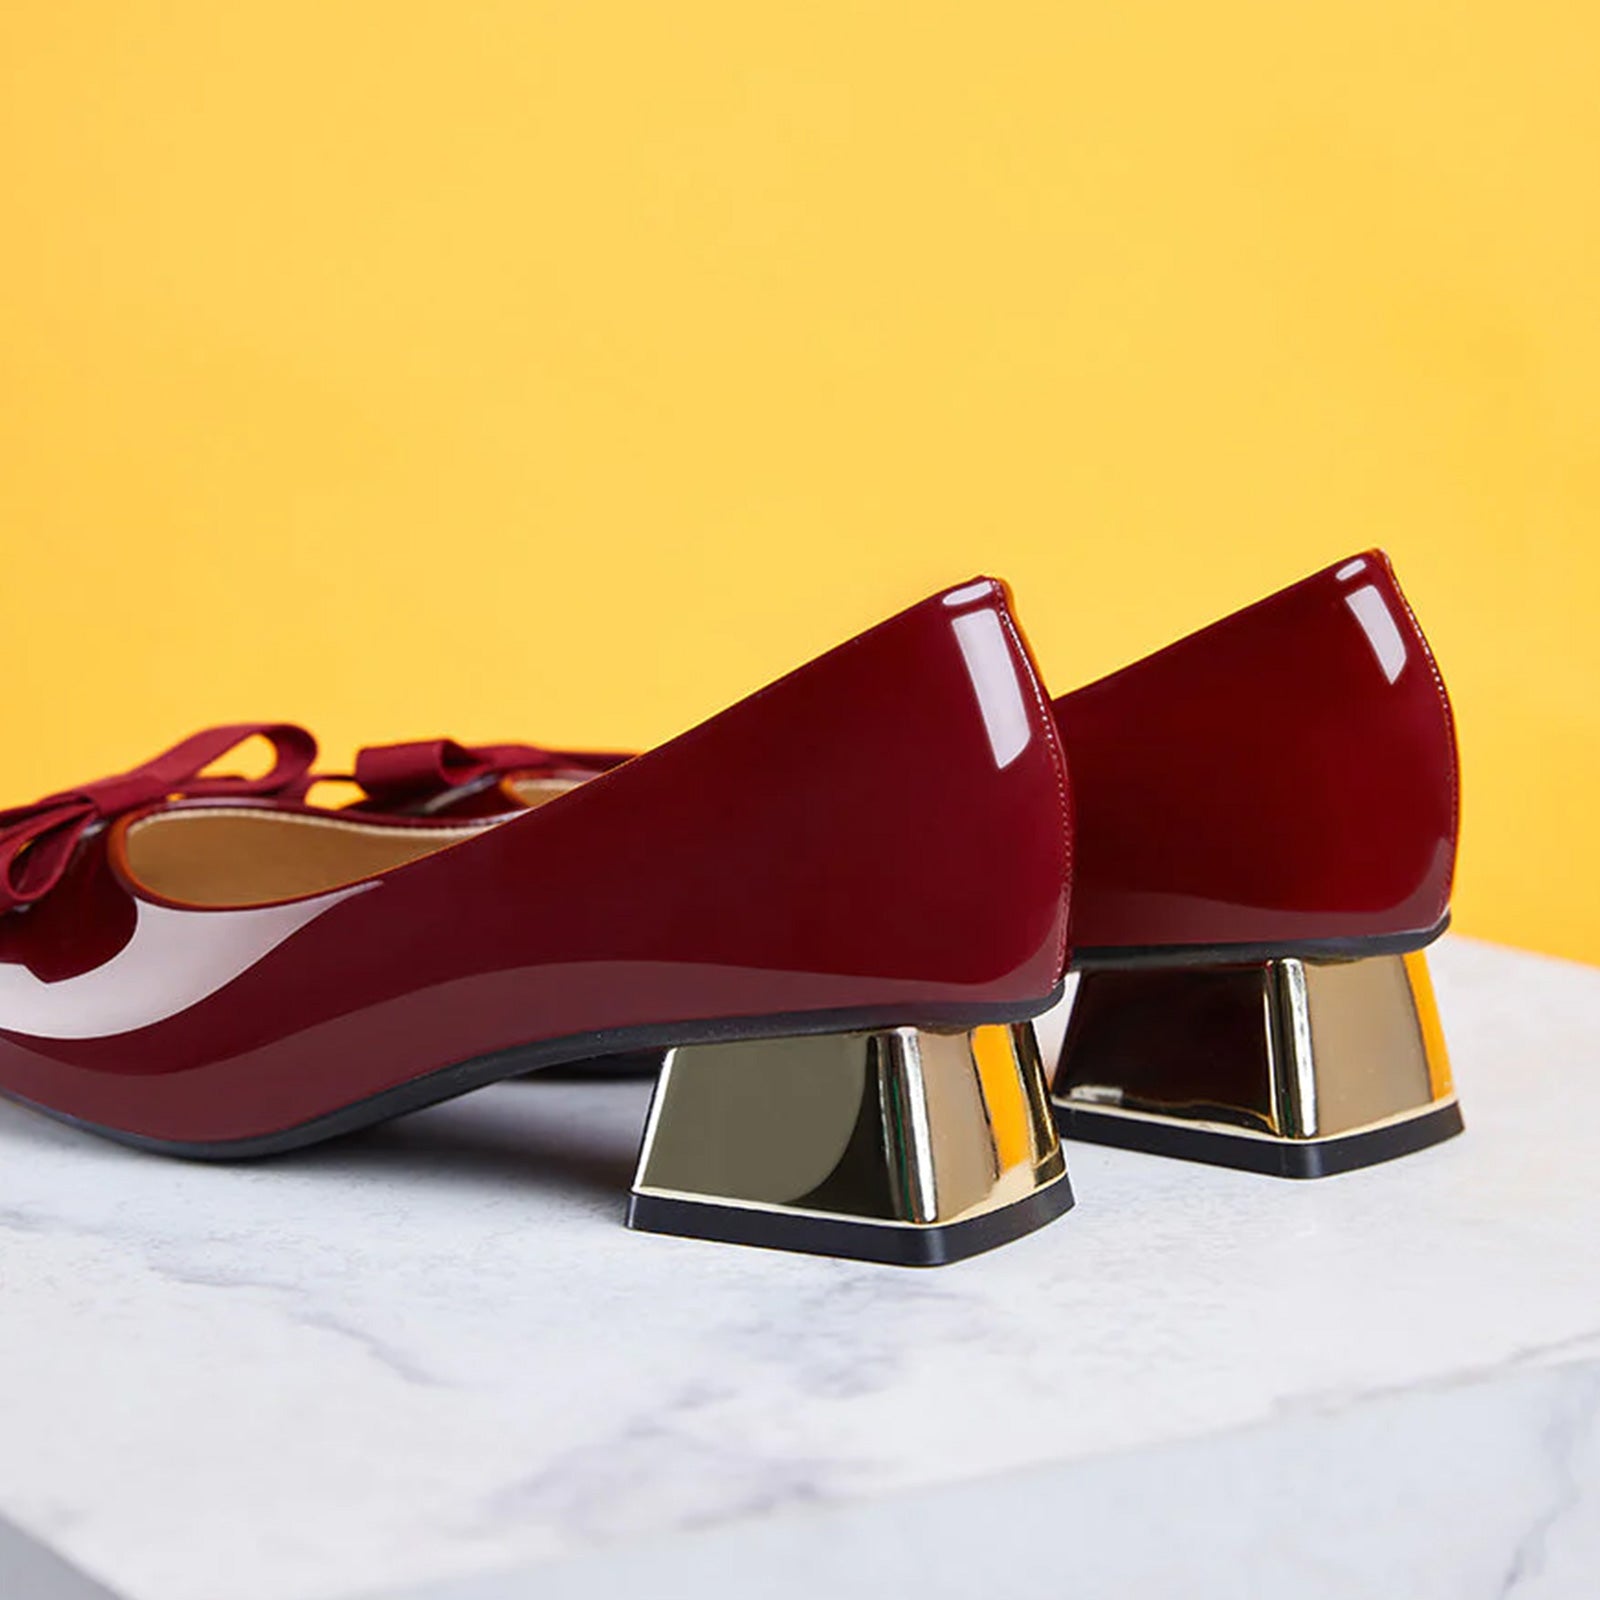 Patent Leather Block Heel Pumps in Red, combining timeless elegance with a modern twist